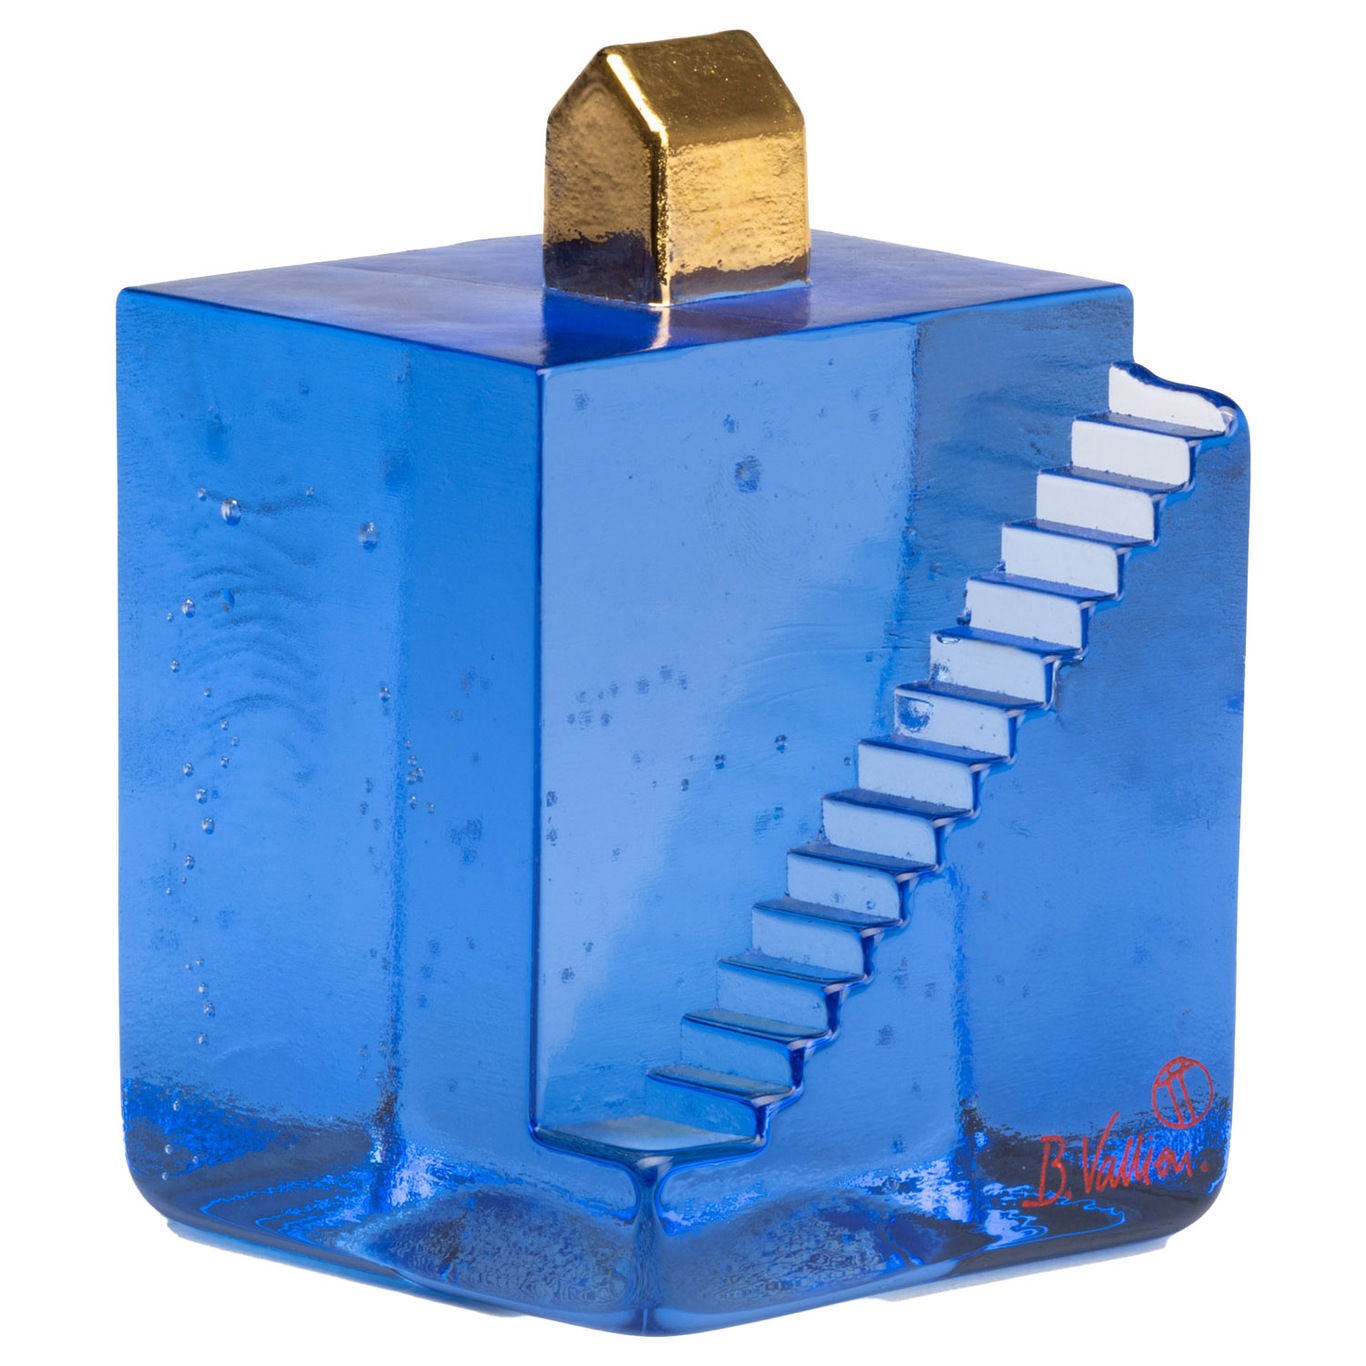 Fortress Stairs Art Glass, Blue/Gold BV AC-23